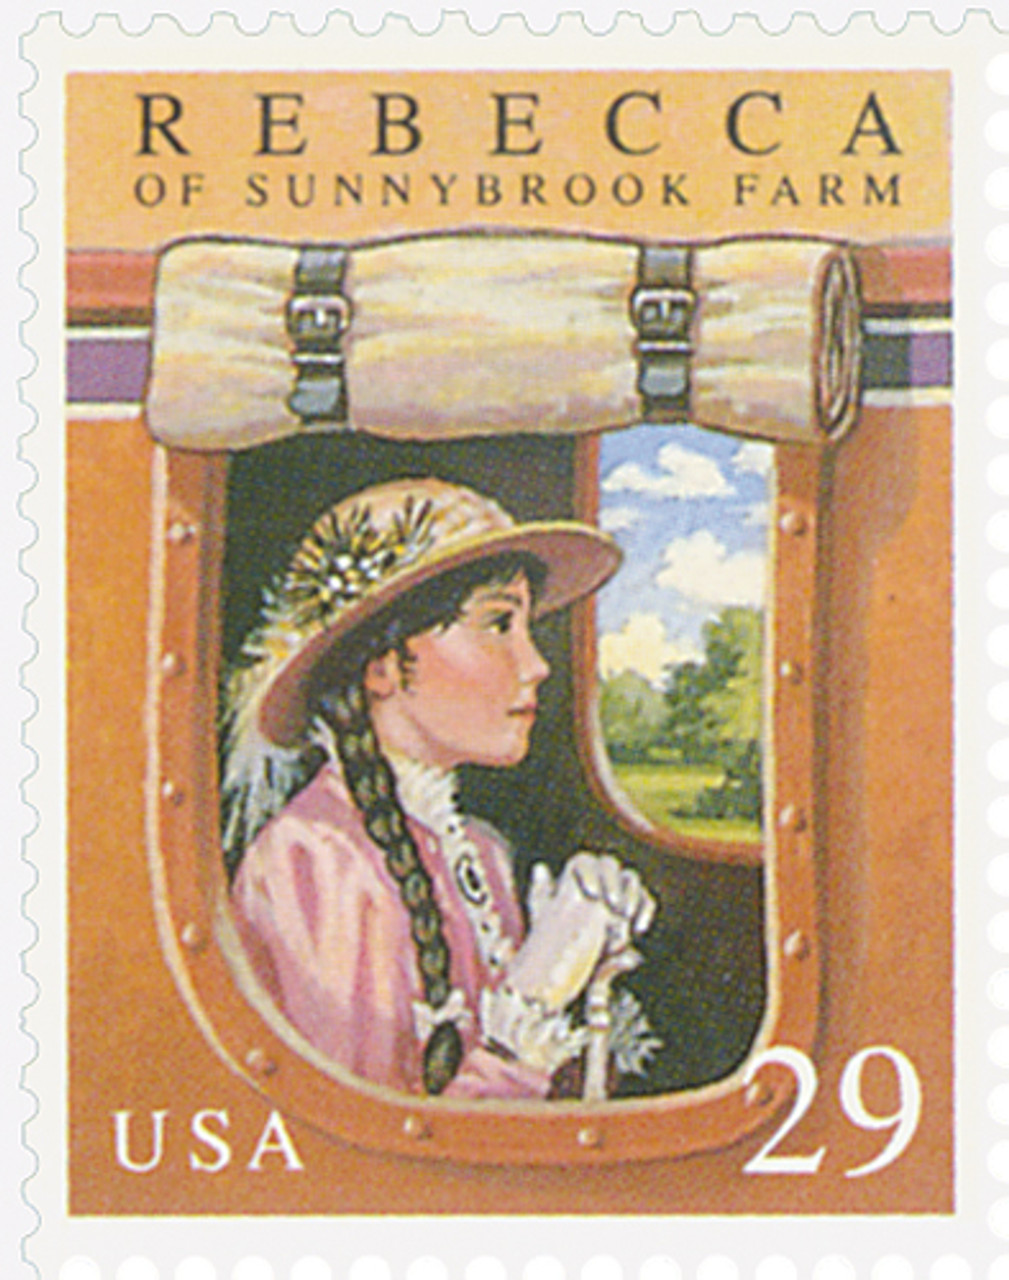 USPS 1993 Commemorative Stamp Collection Book 